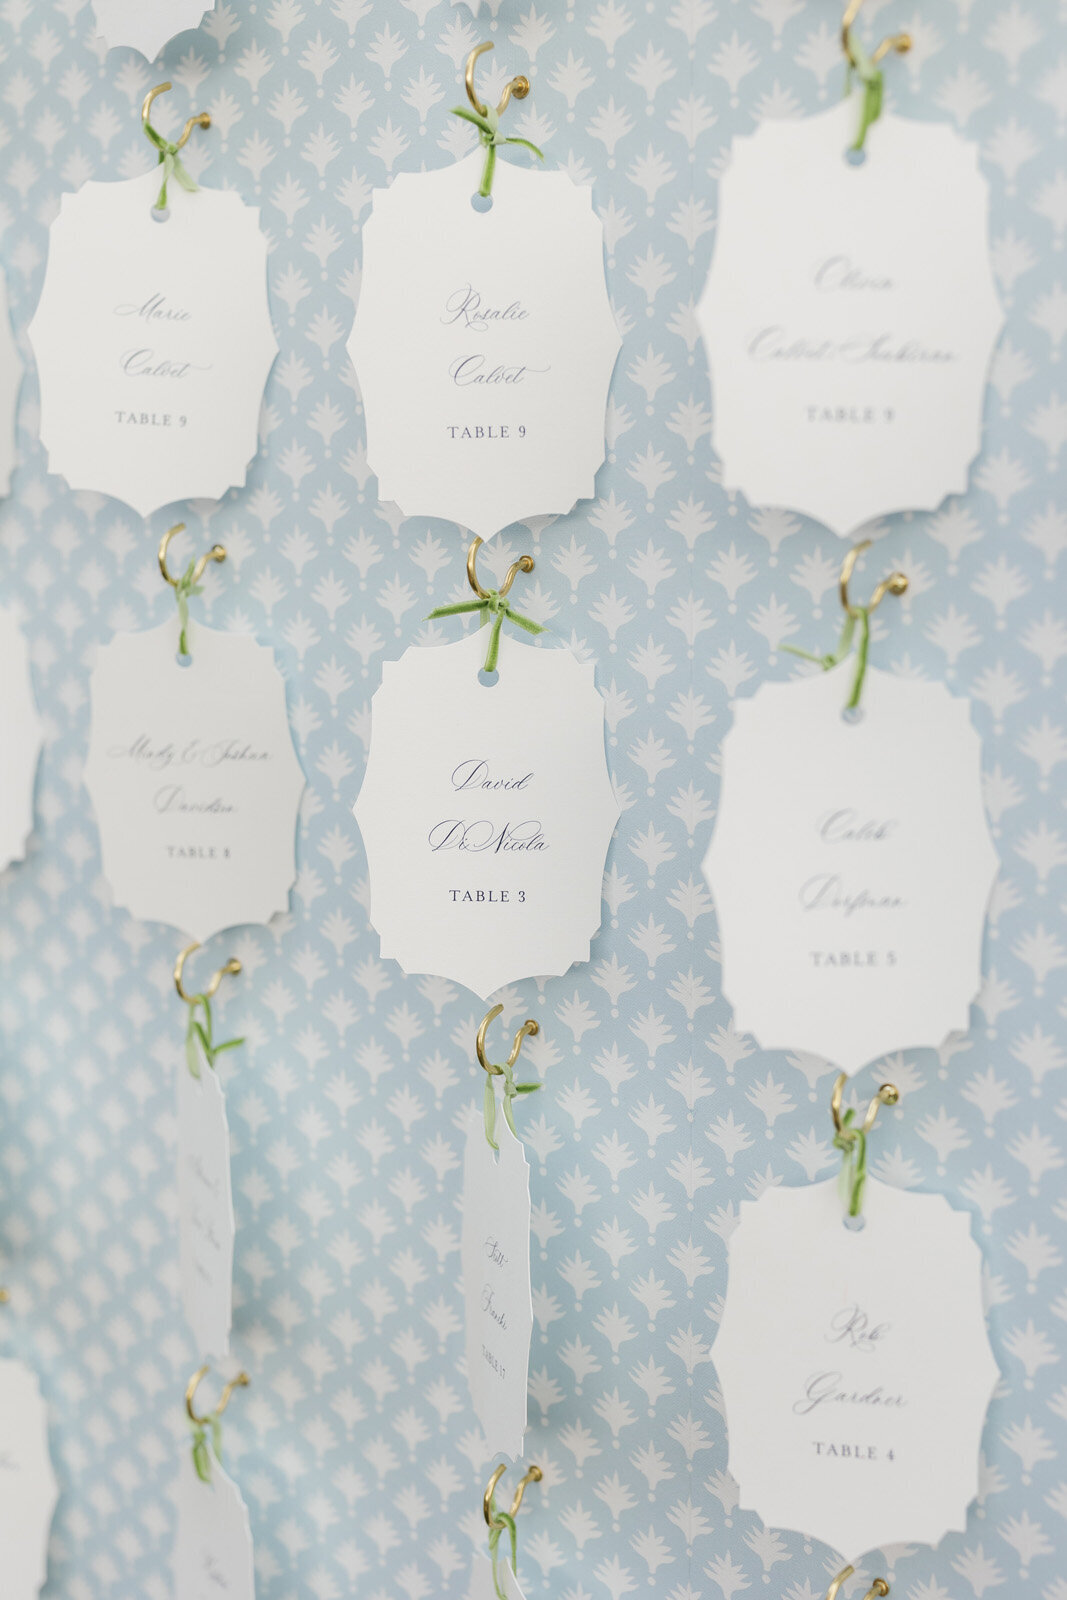 Kate_Murtaugh_Events_wedding_planner_Maine_sailcloth_tent_place_cards